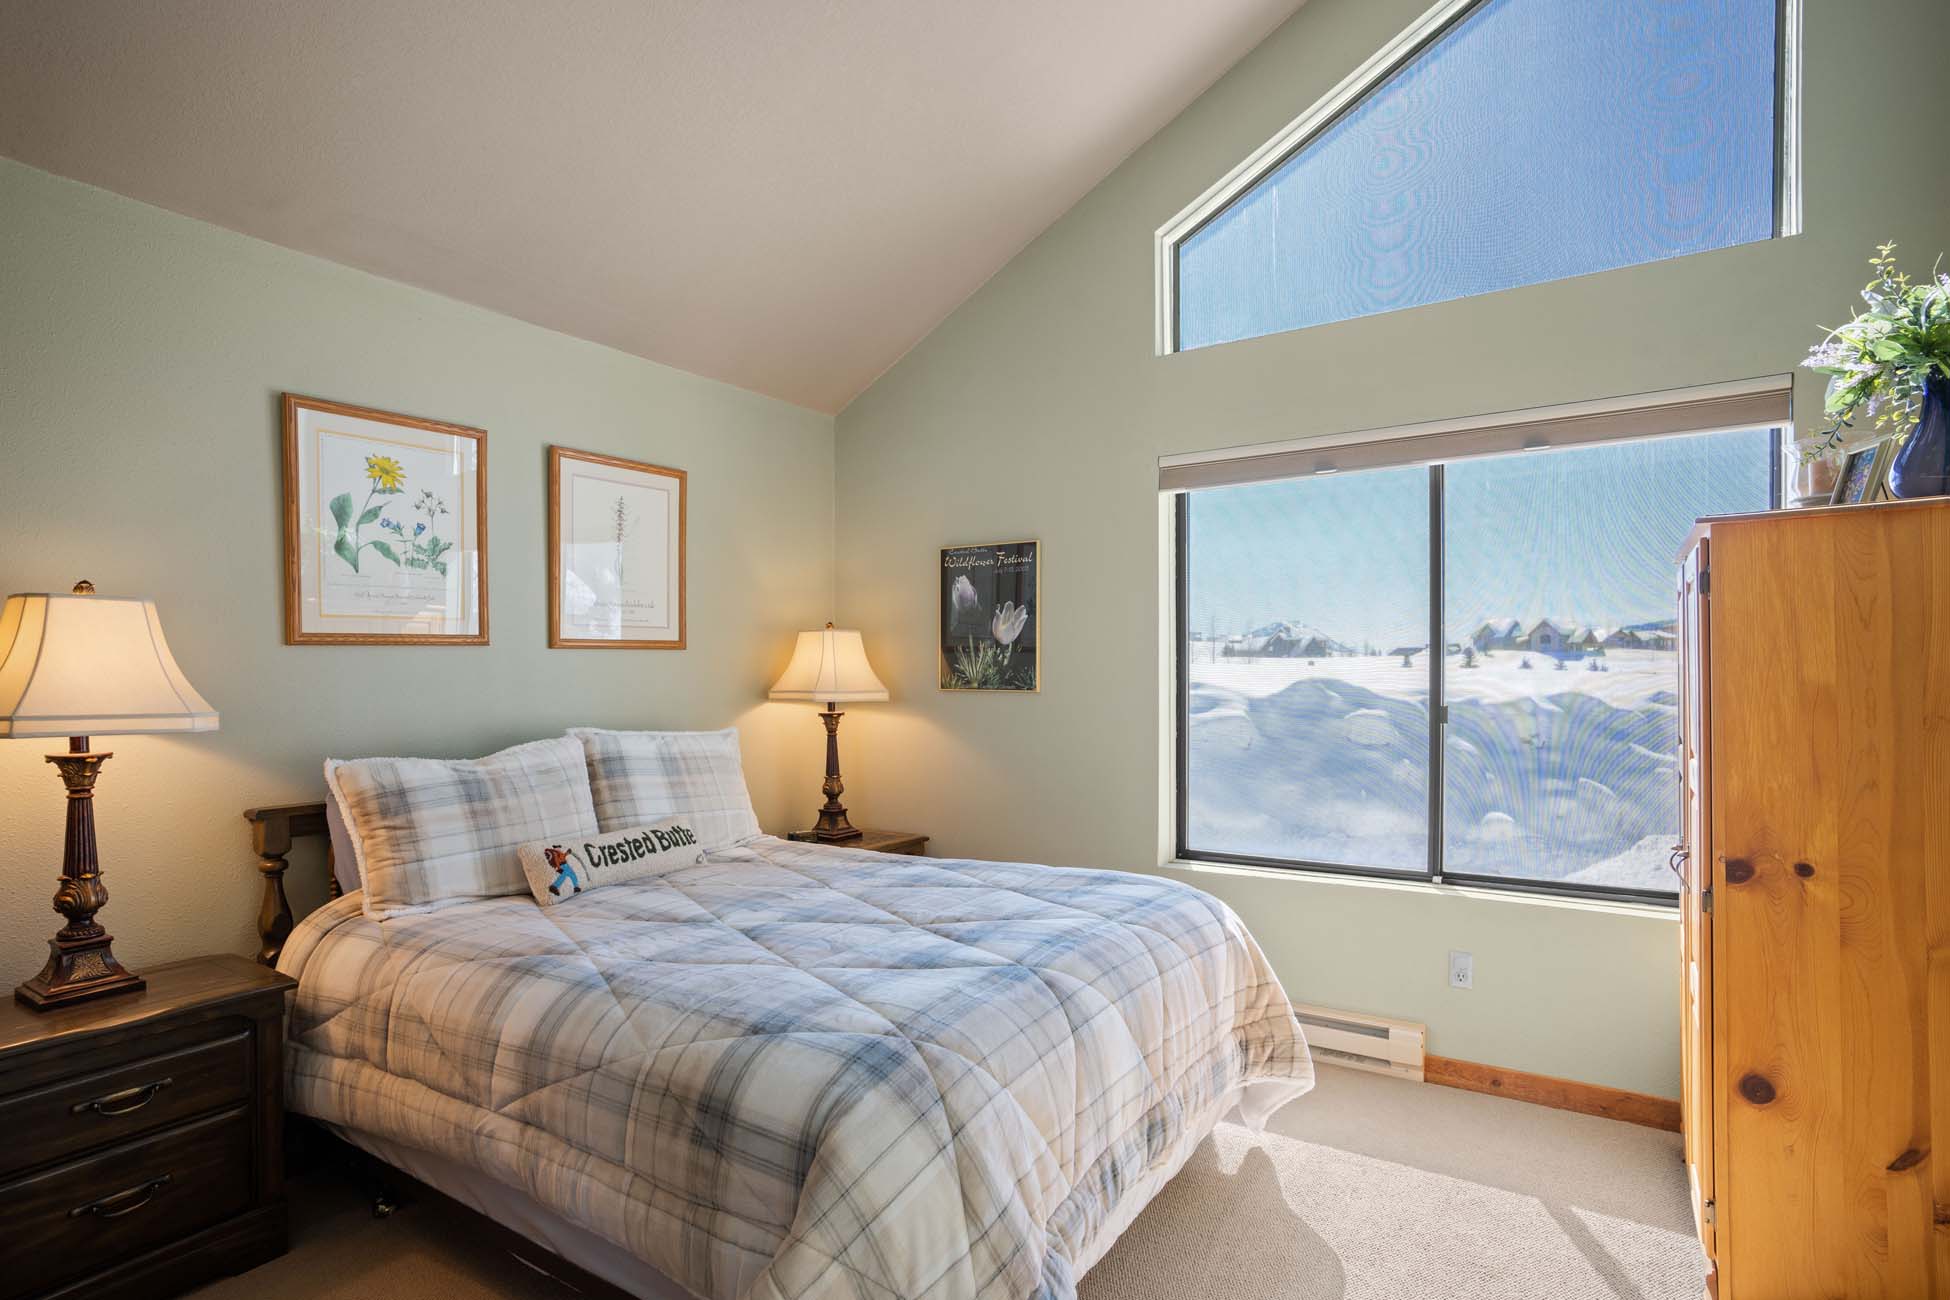 49 Powderview Drive, Crested Butte Colorado - primary bedroom